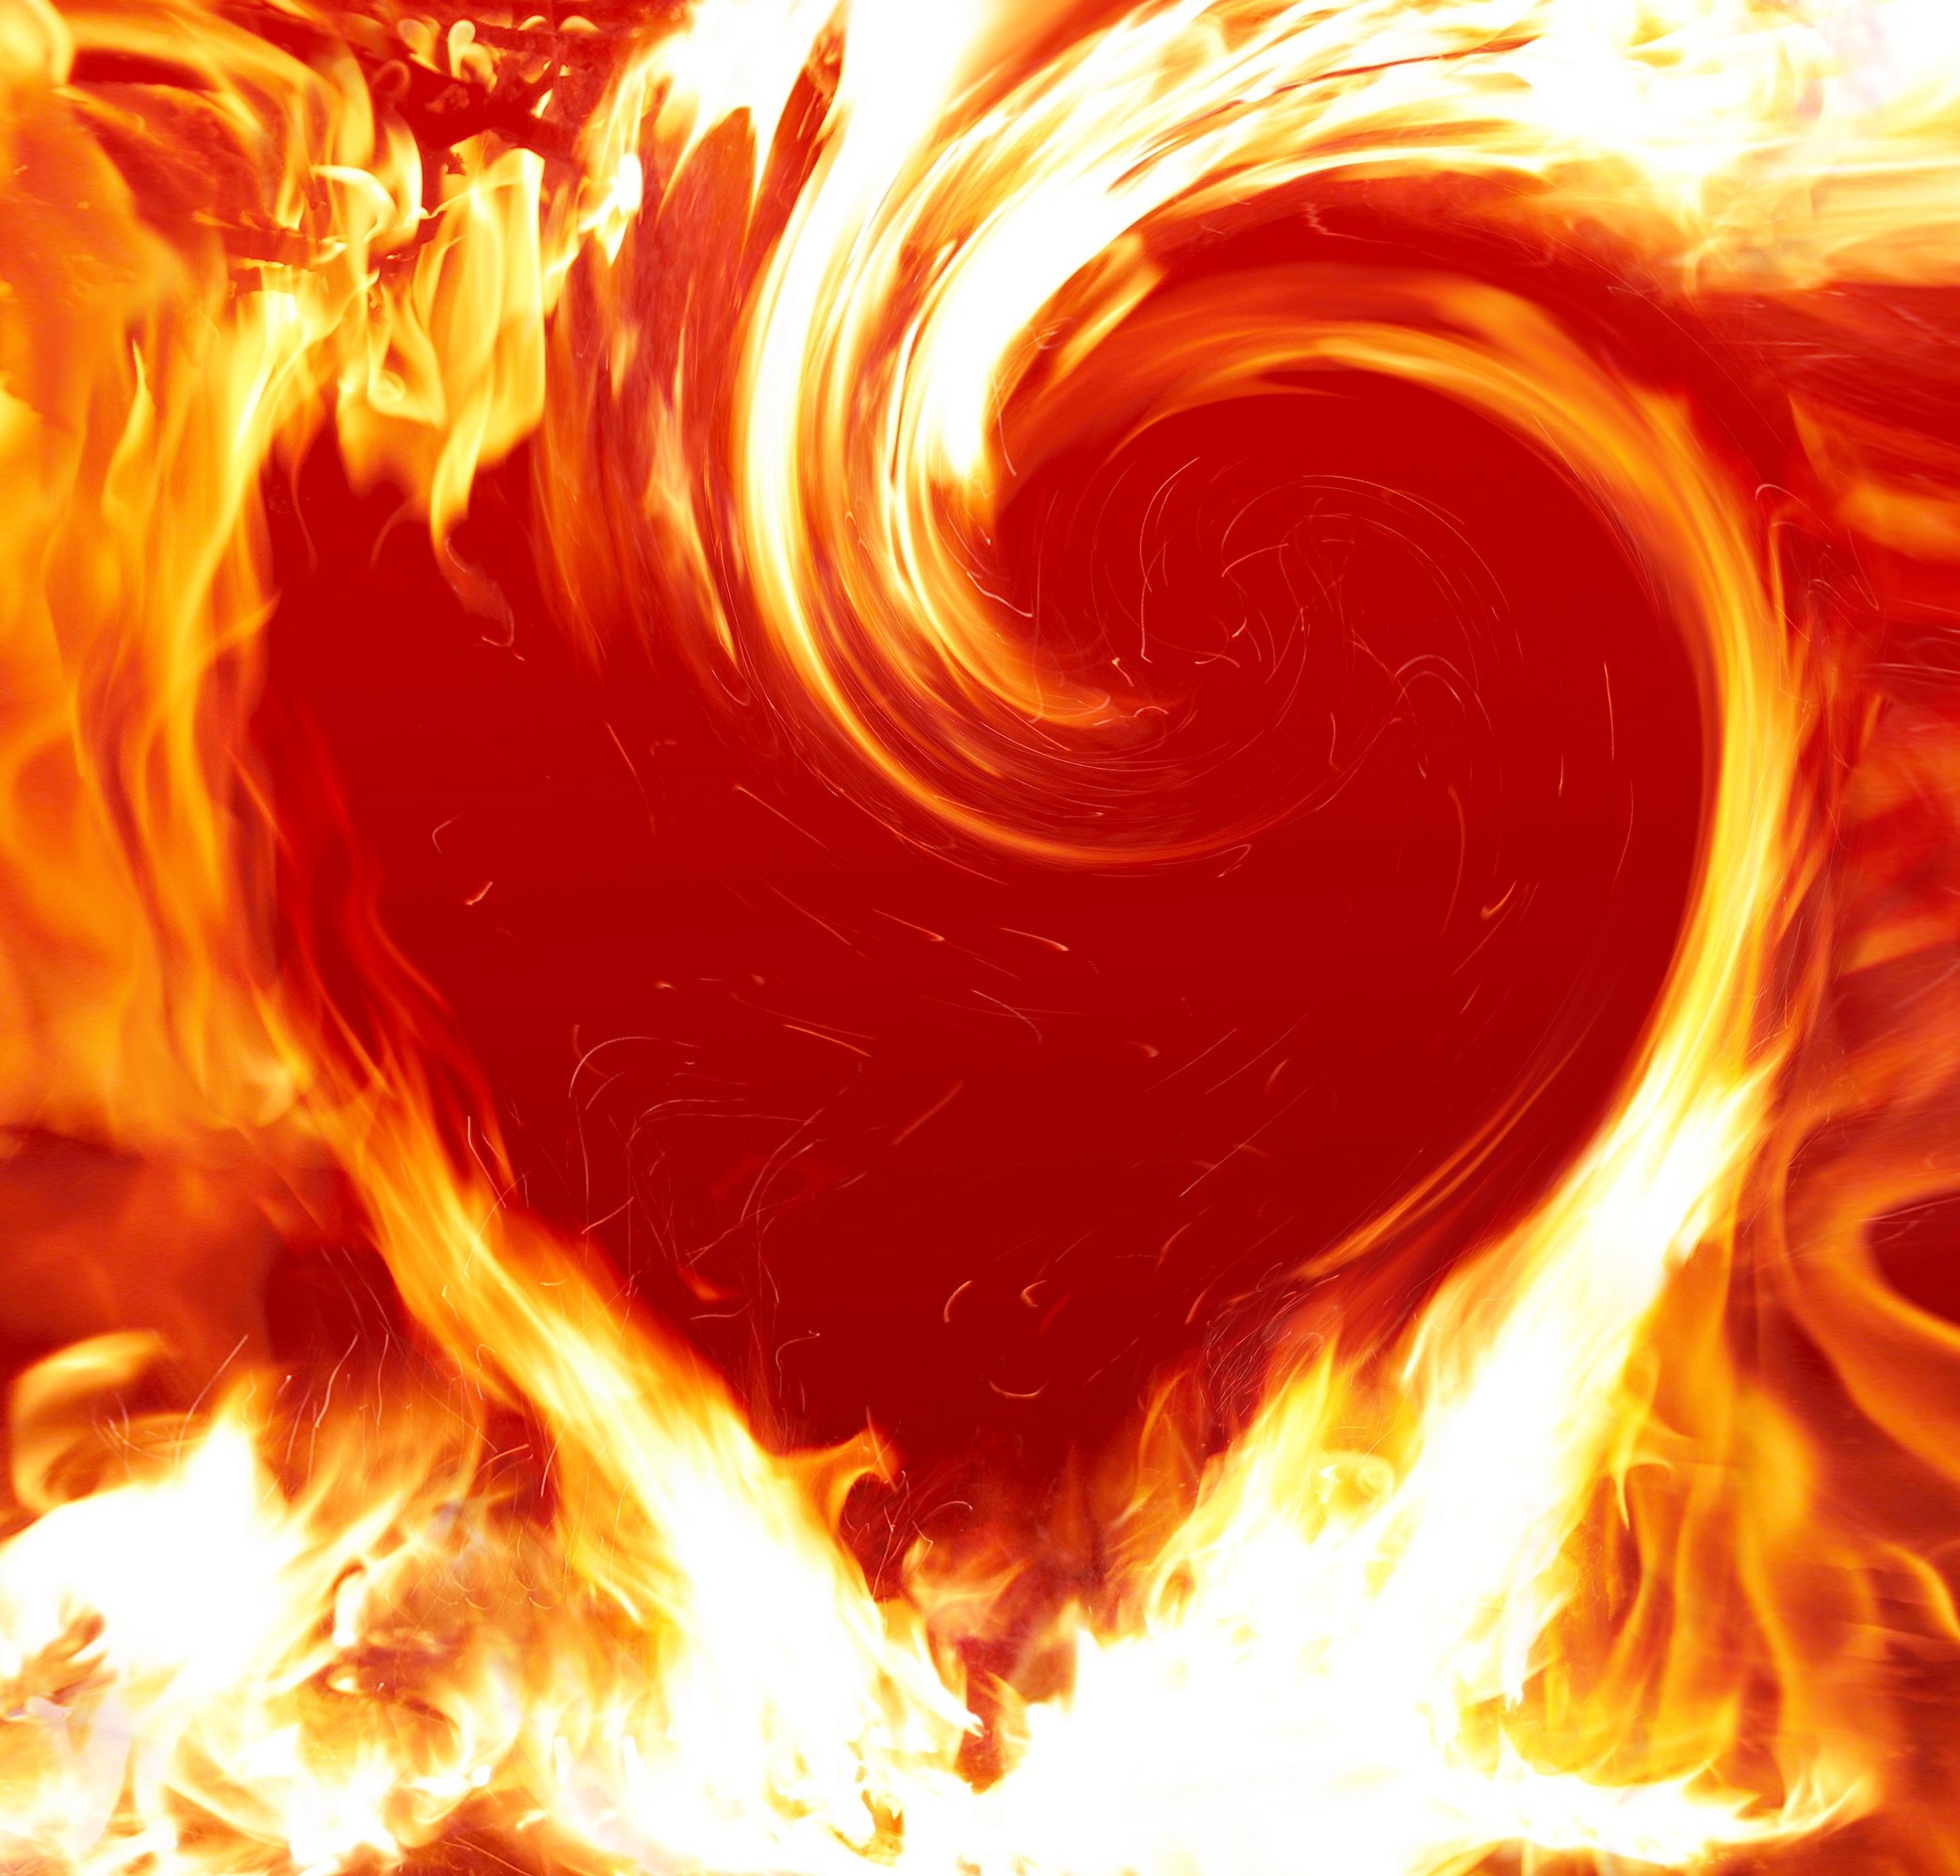 flaming red heart whit and yellow flames forming border of the heart